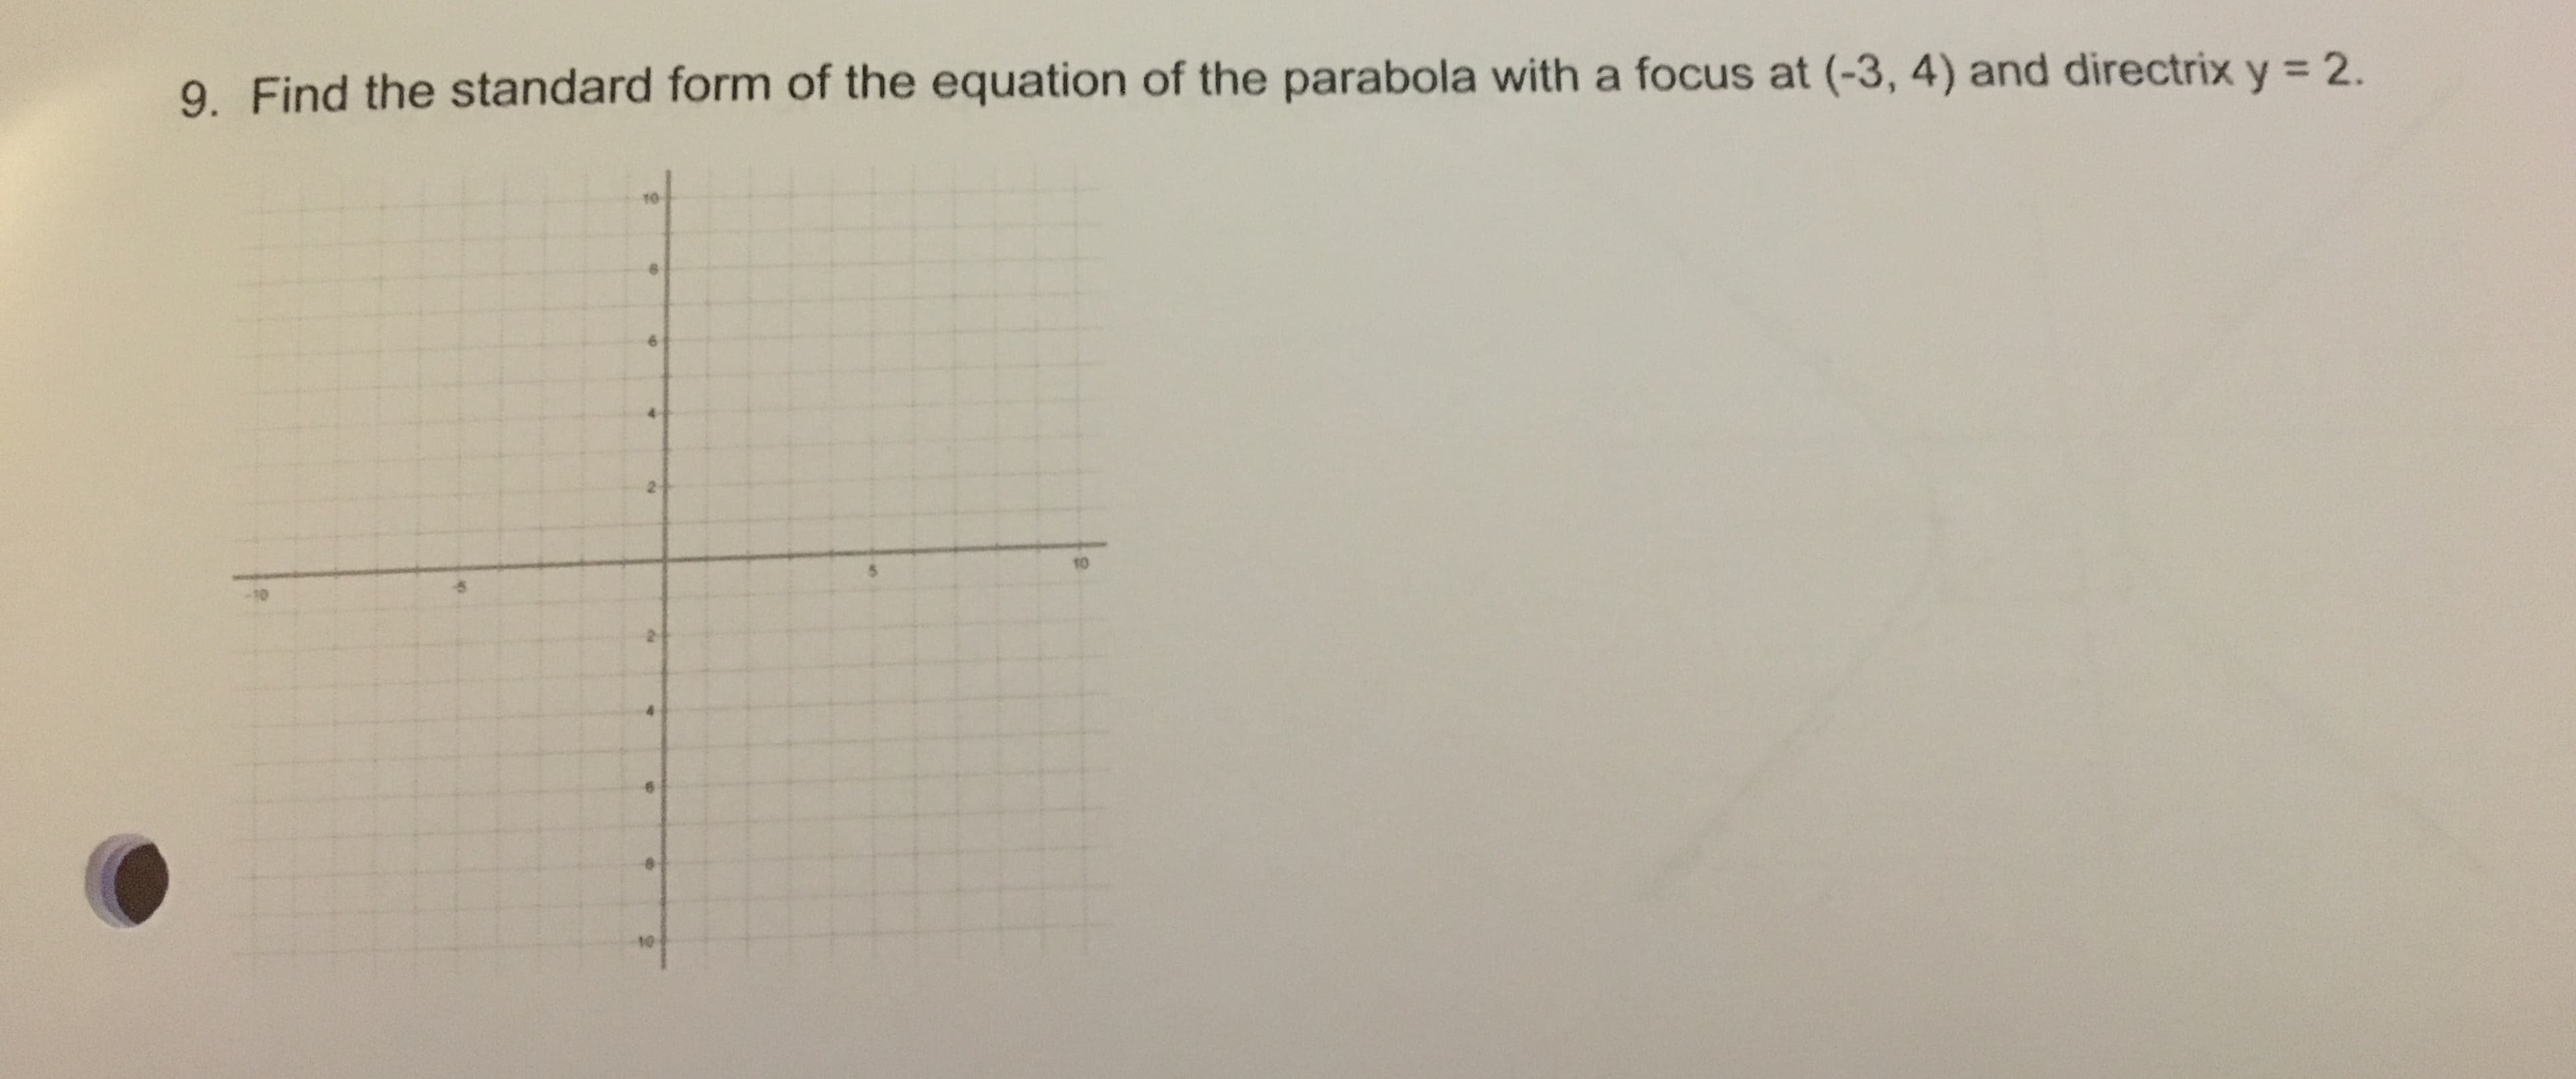 9. Find the standard form of the equation of the parabola with a focus at (-3, 4) and directrix y = 2.
10
-10
10
